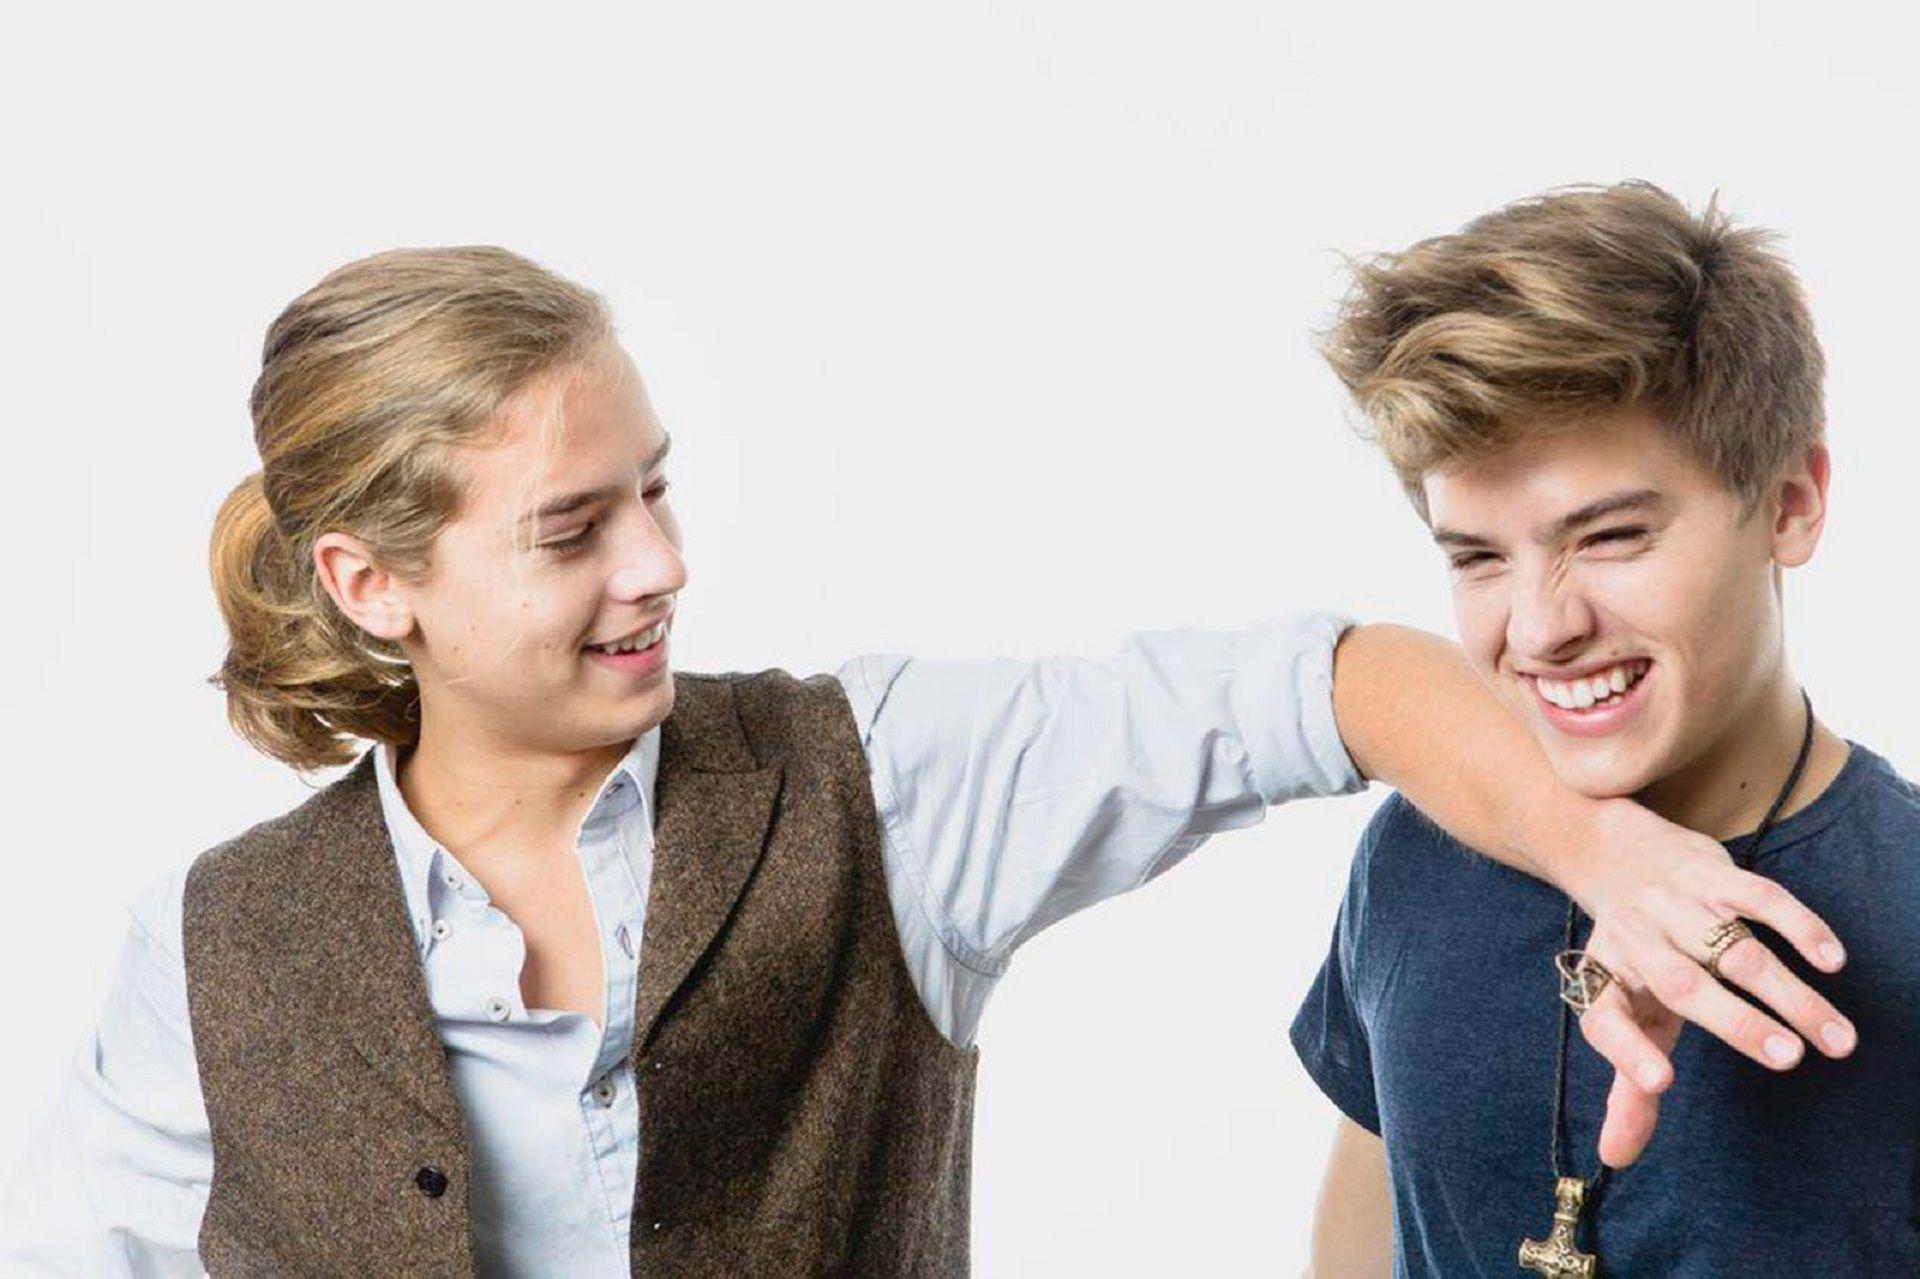 Cole Sprouse Wallpaper Image Photo Picture Background